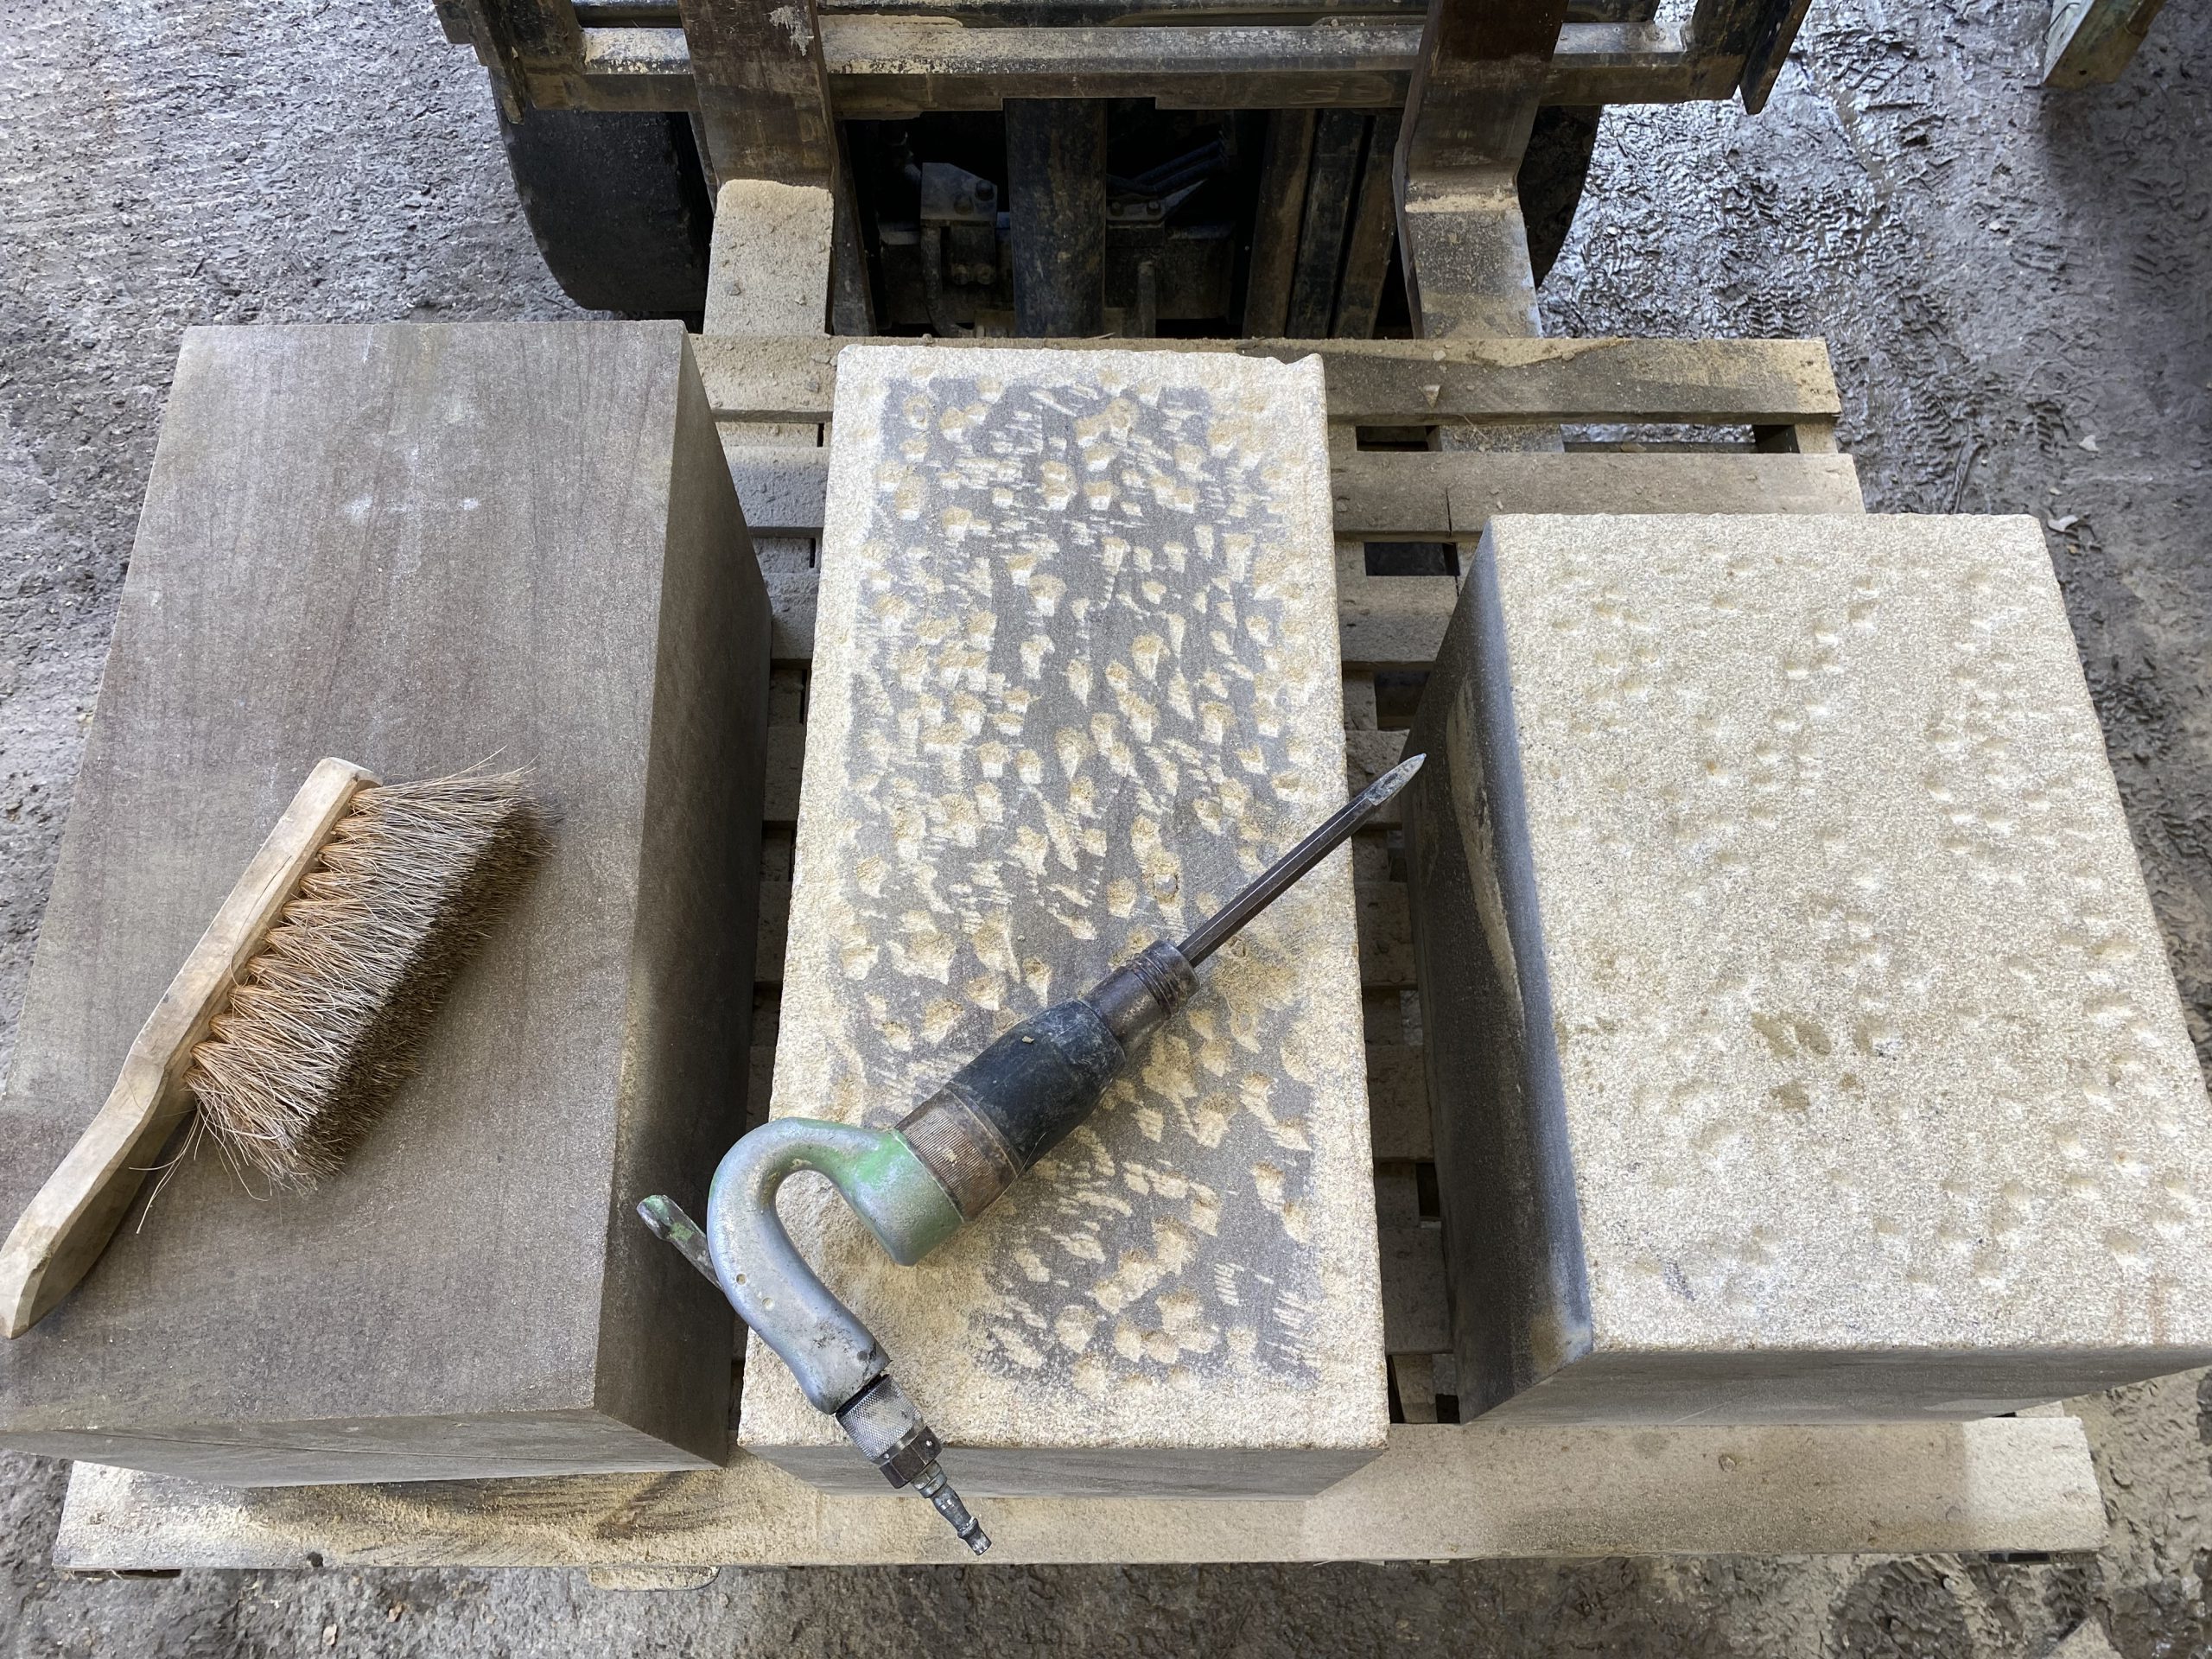 Masoning a block of new stone (left) into punched walling (right)